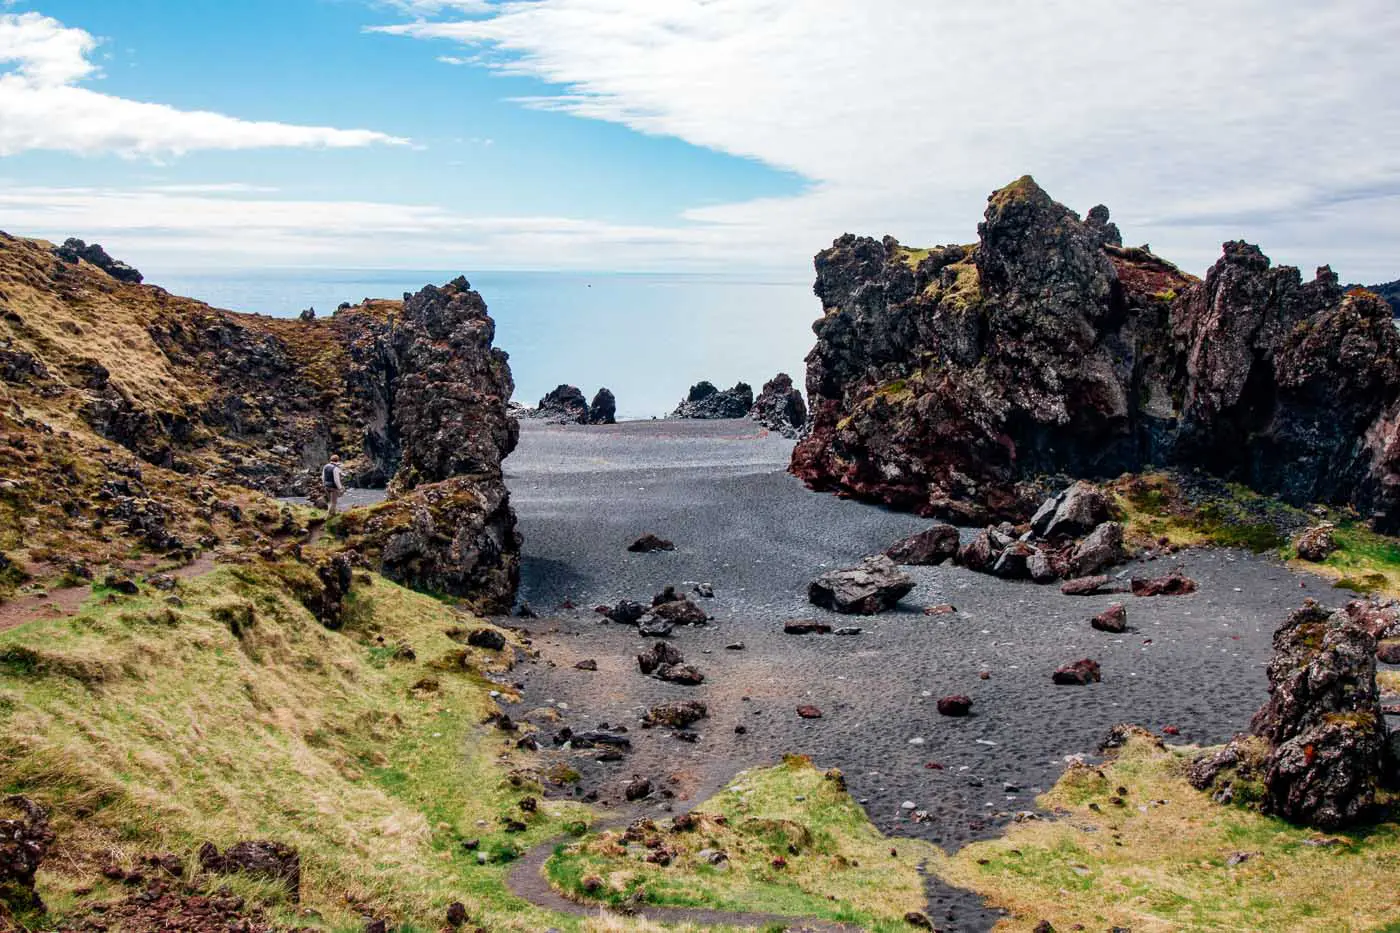 A black sand beach with volcanic rock formations